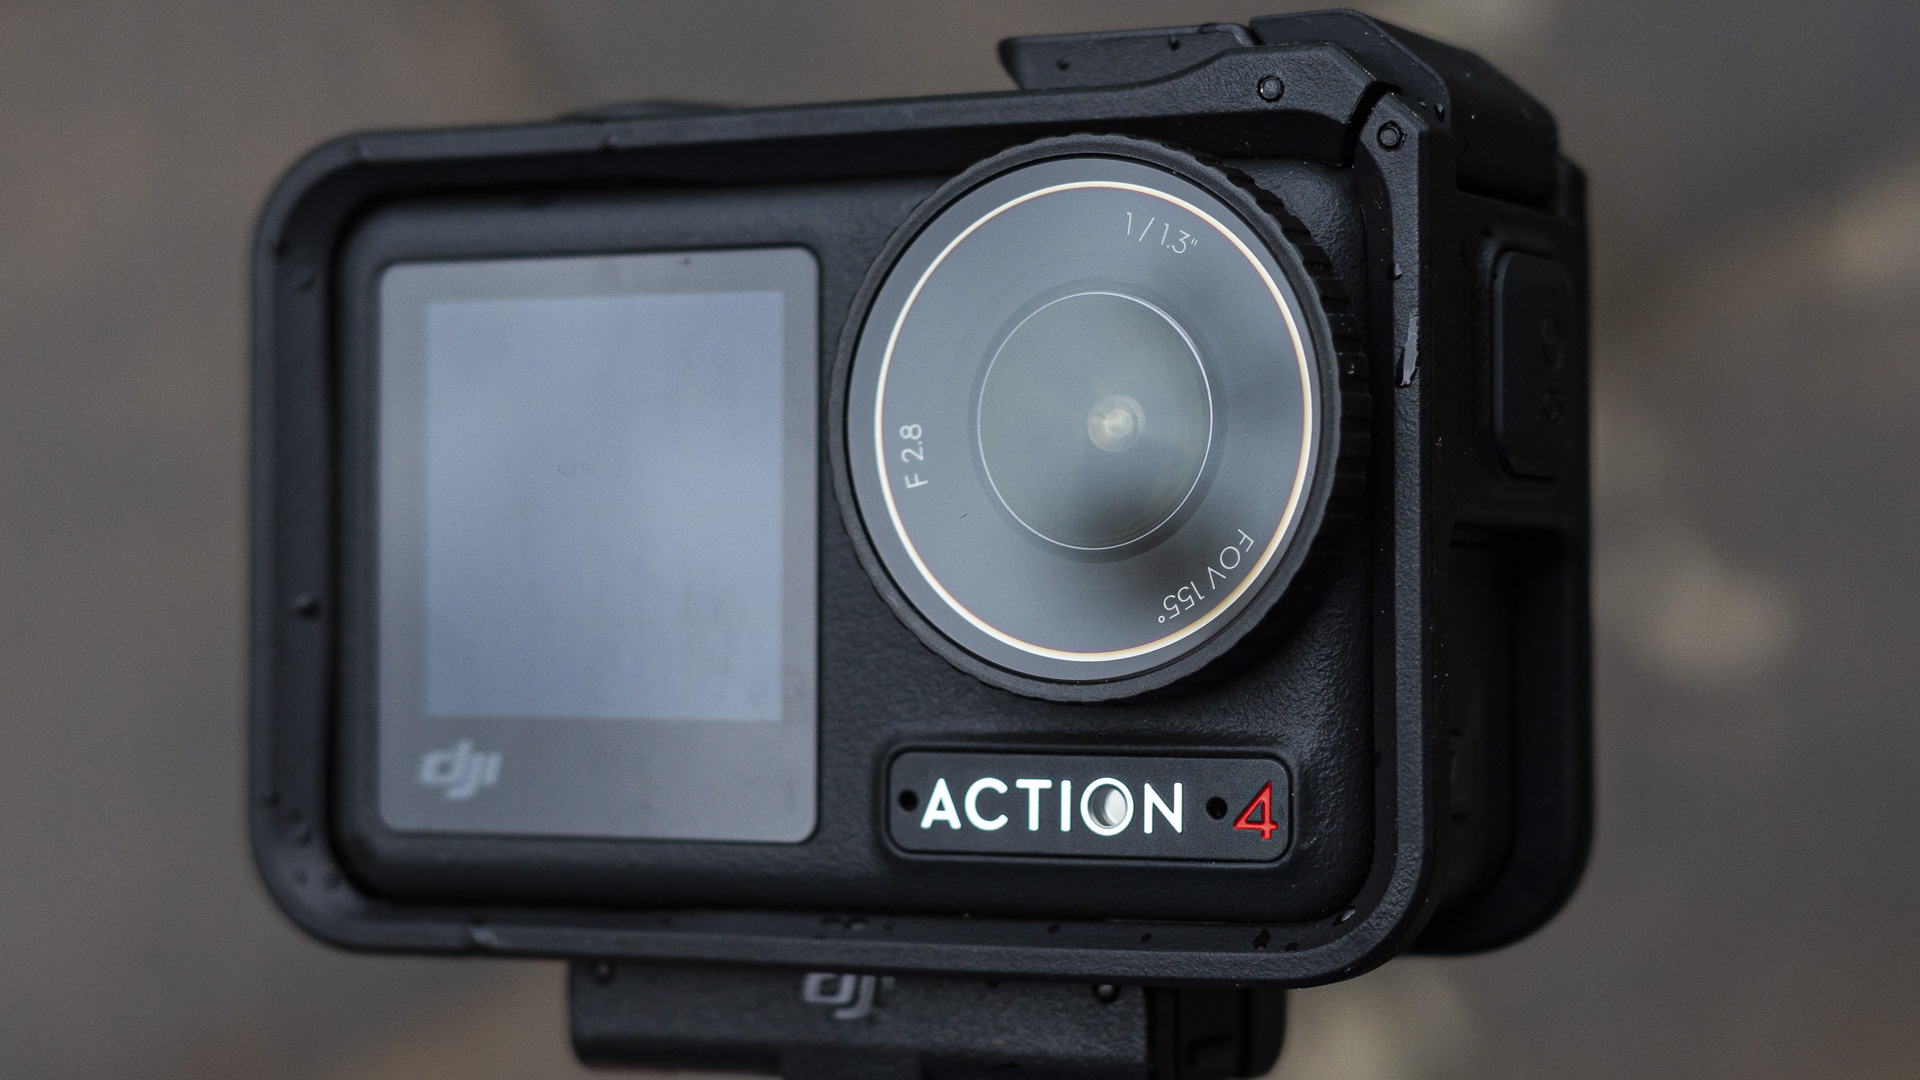 DJI Osmo Action 4 camera in protective cage optional accessory